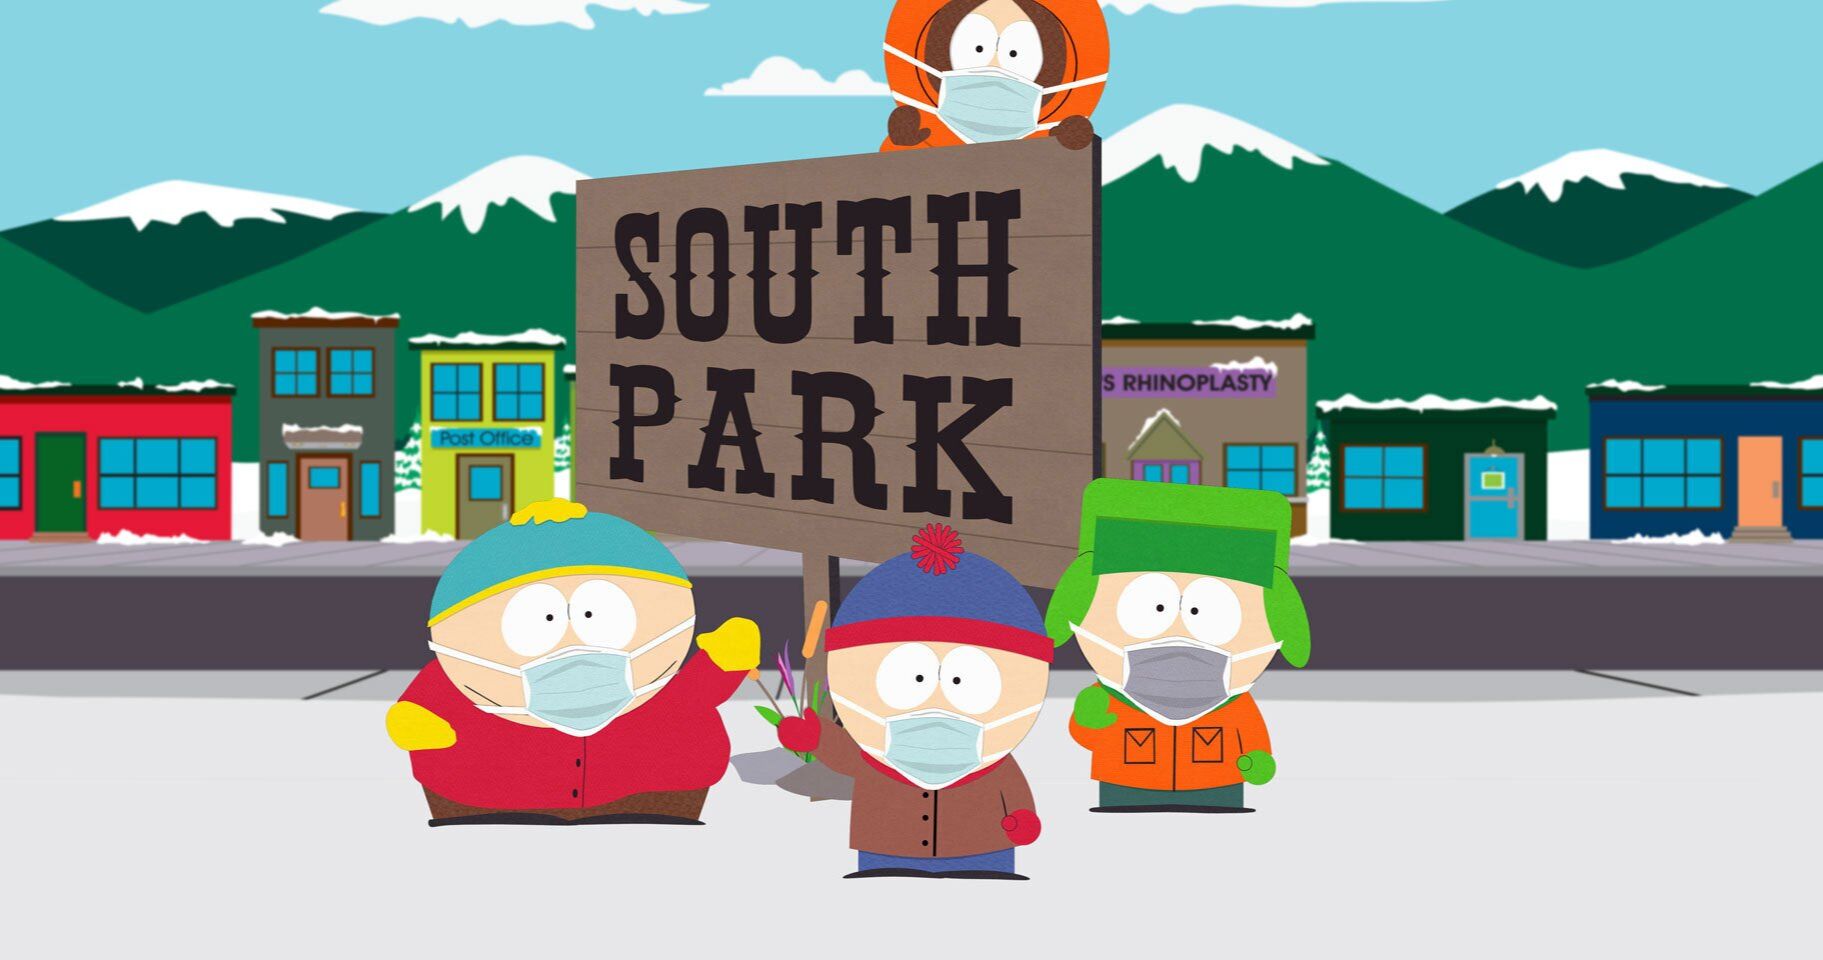 South Park to Debut First of 14 Movies on Thanksgiving Day on Paramount+